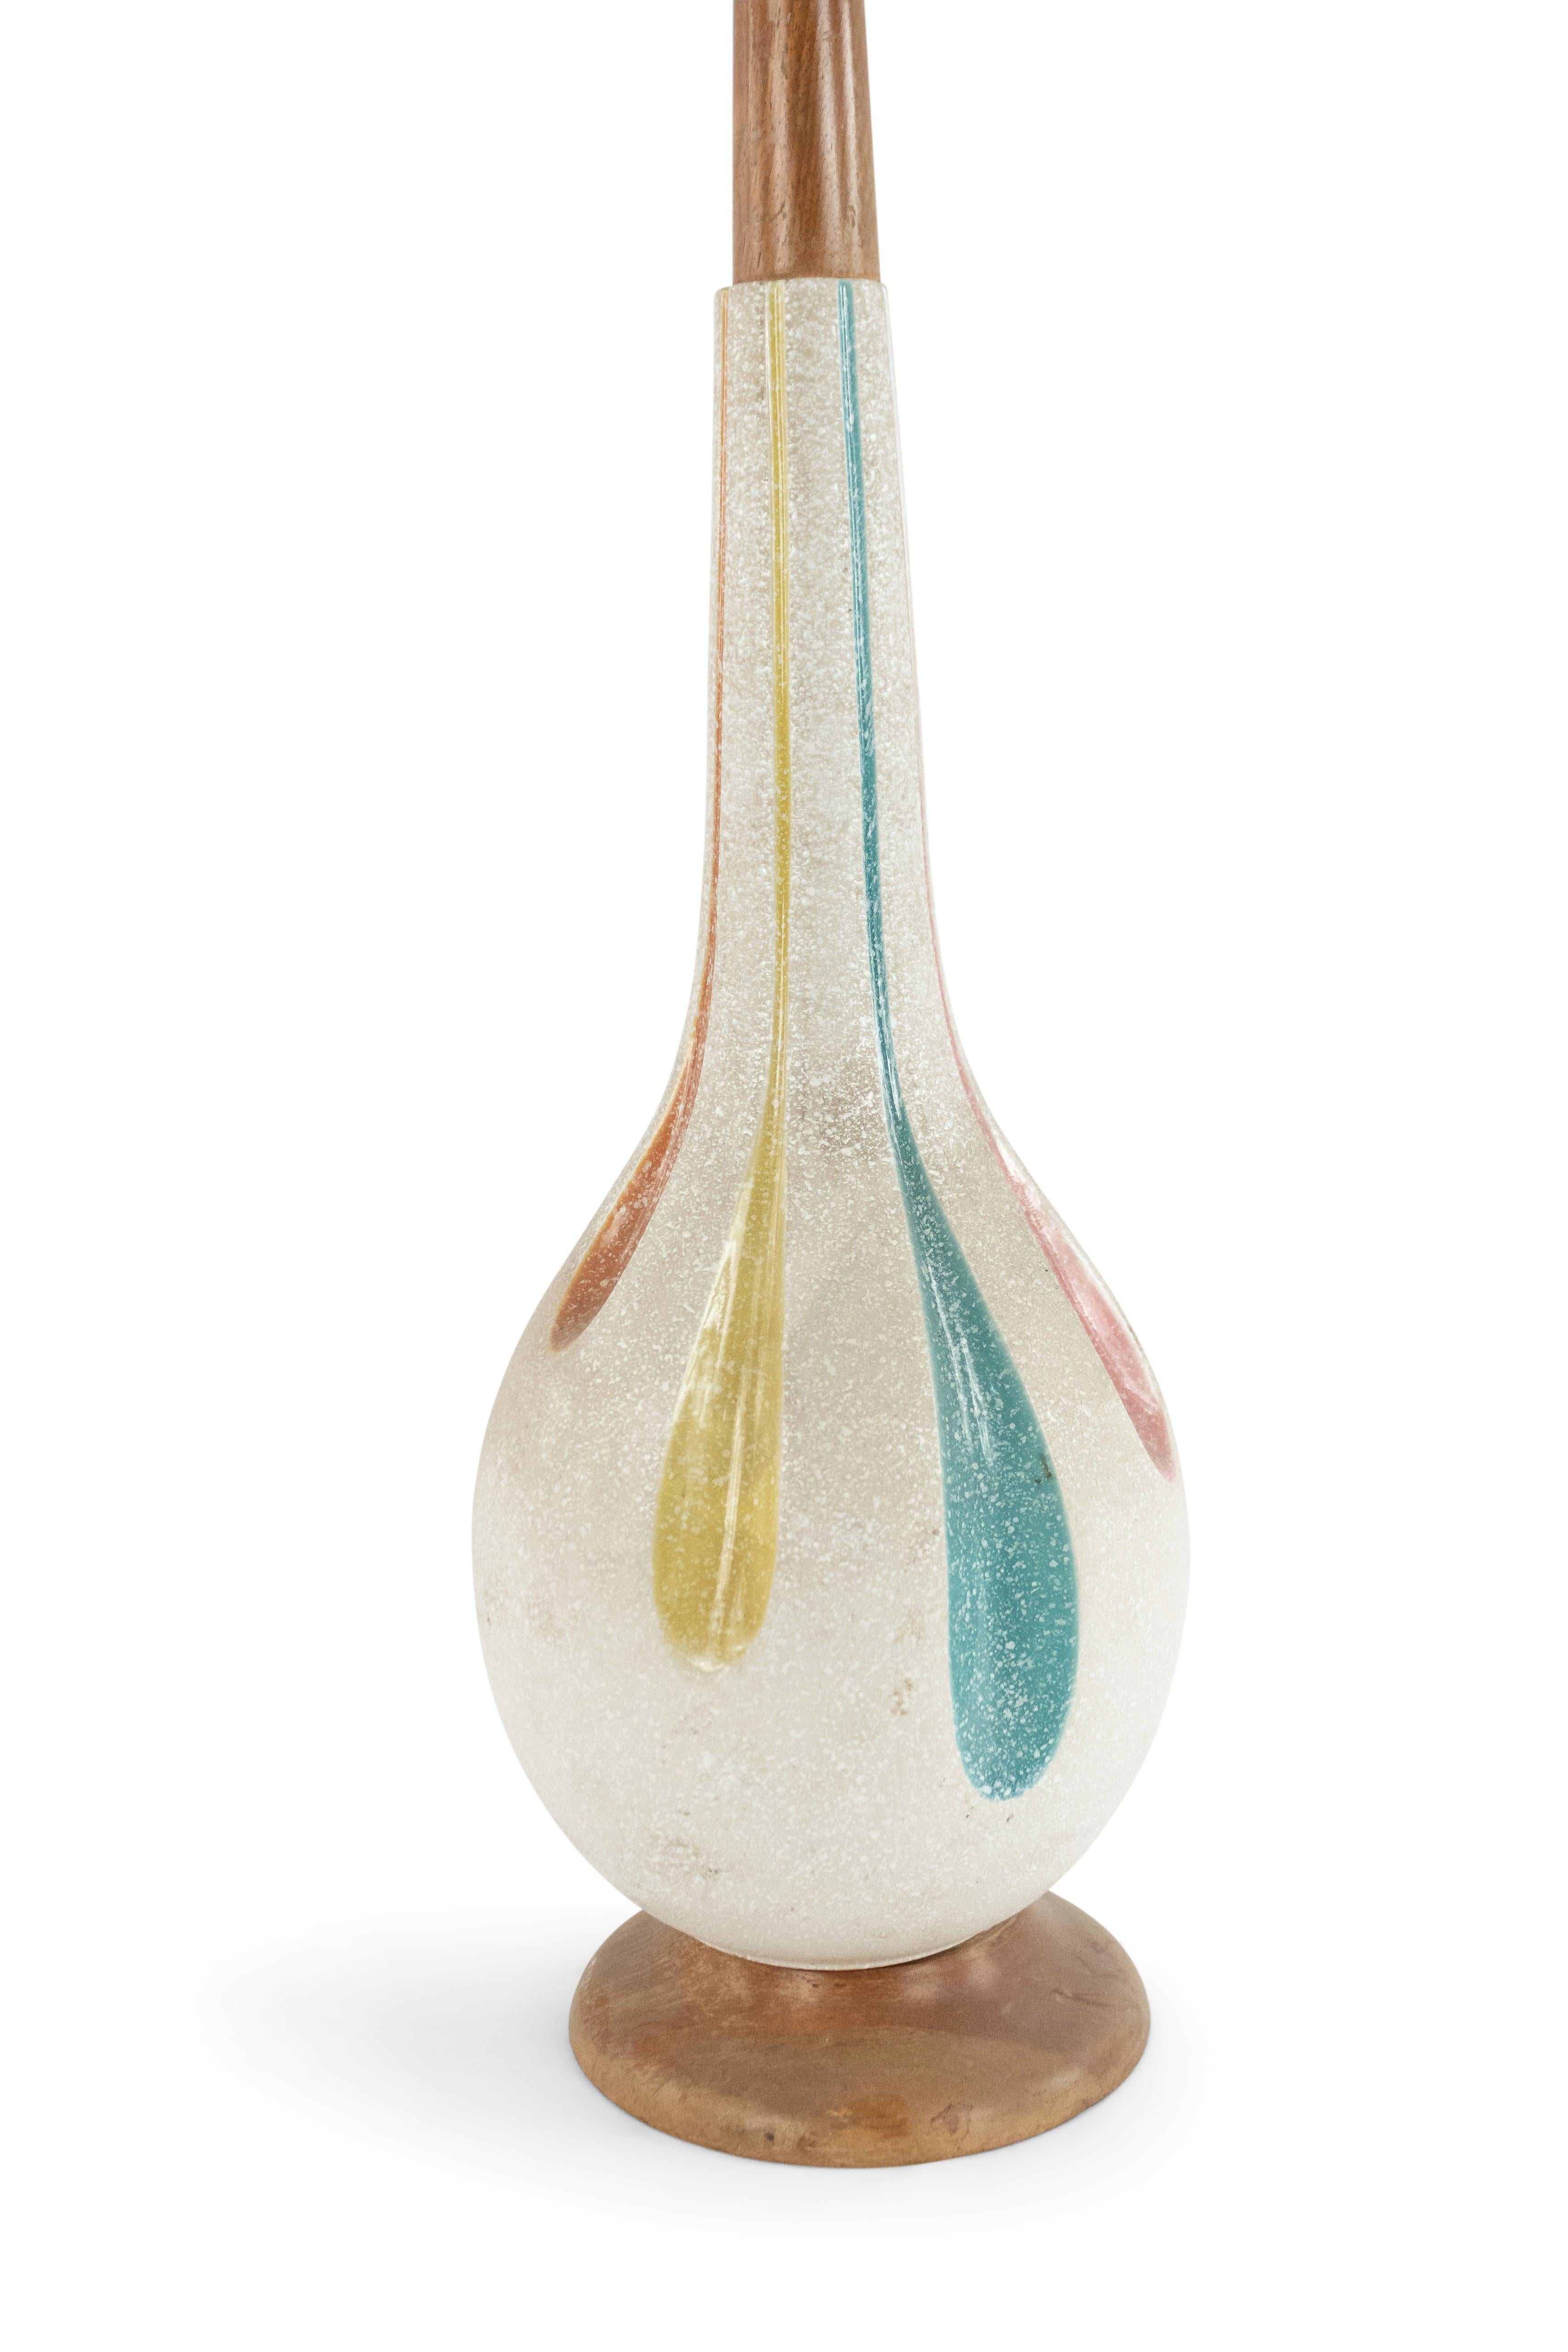 American midcentury beige porcelain table lamp with a tapered neck and stylized multicolored fluted design on a round wood base.